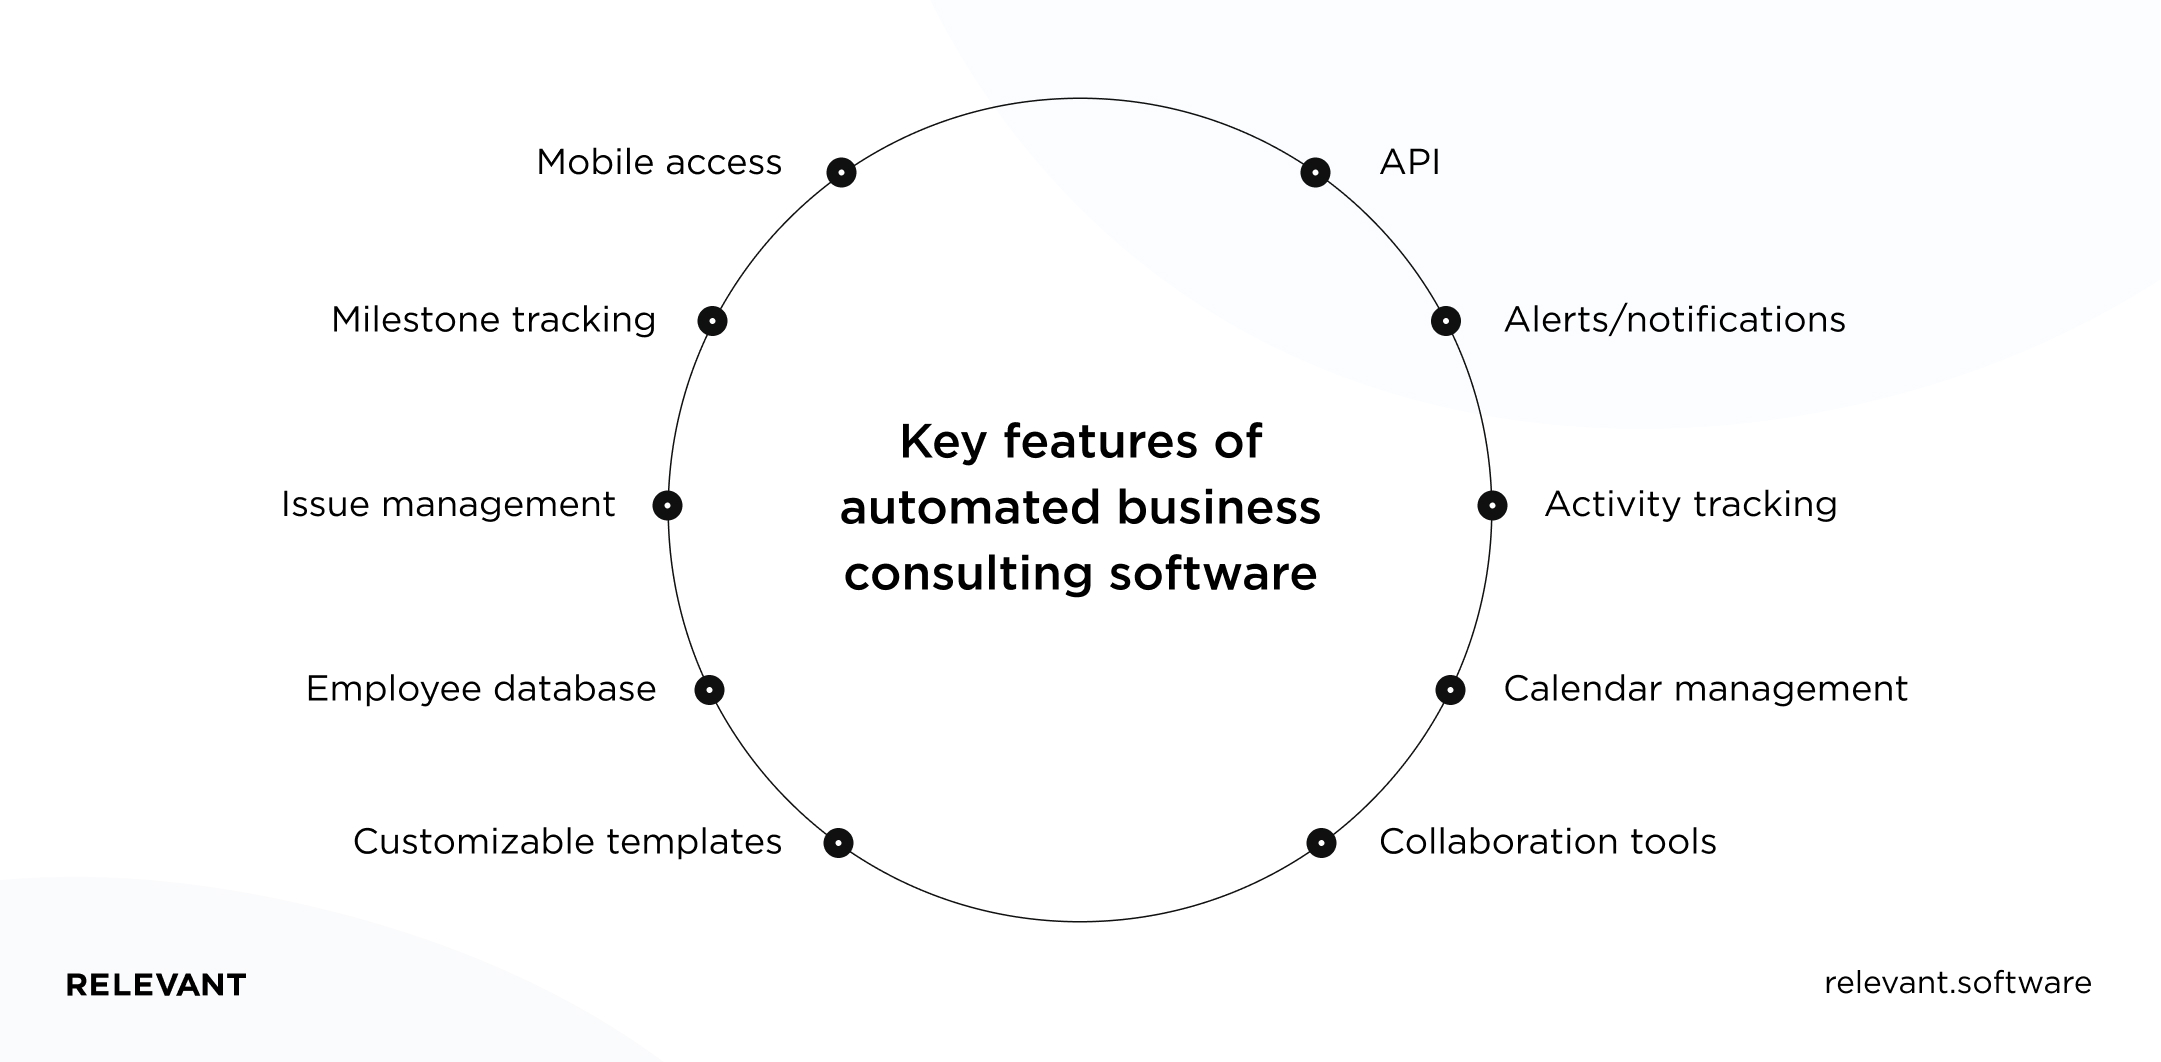 Key features of automated business consulting software